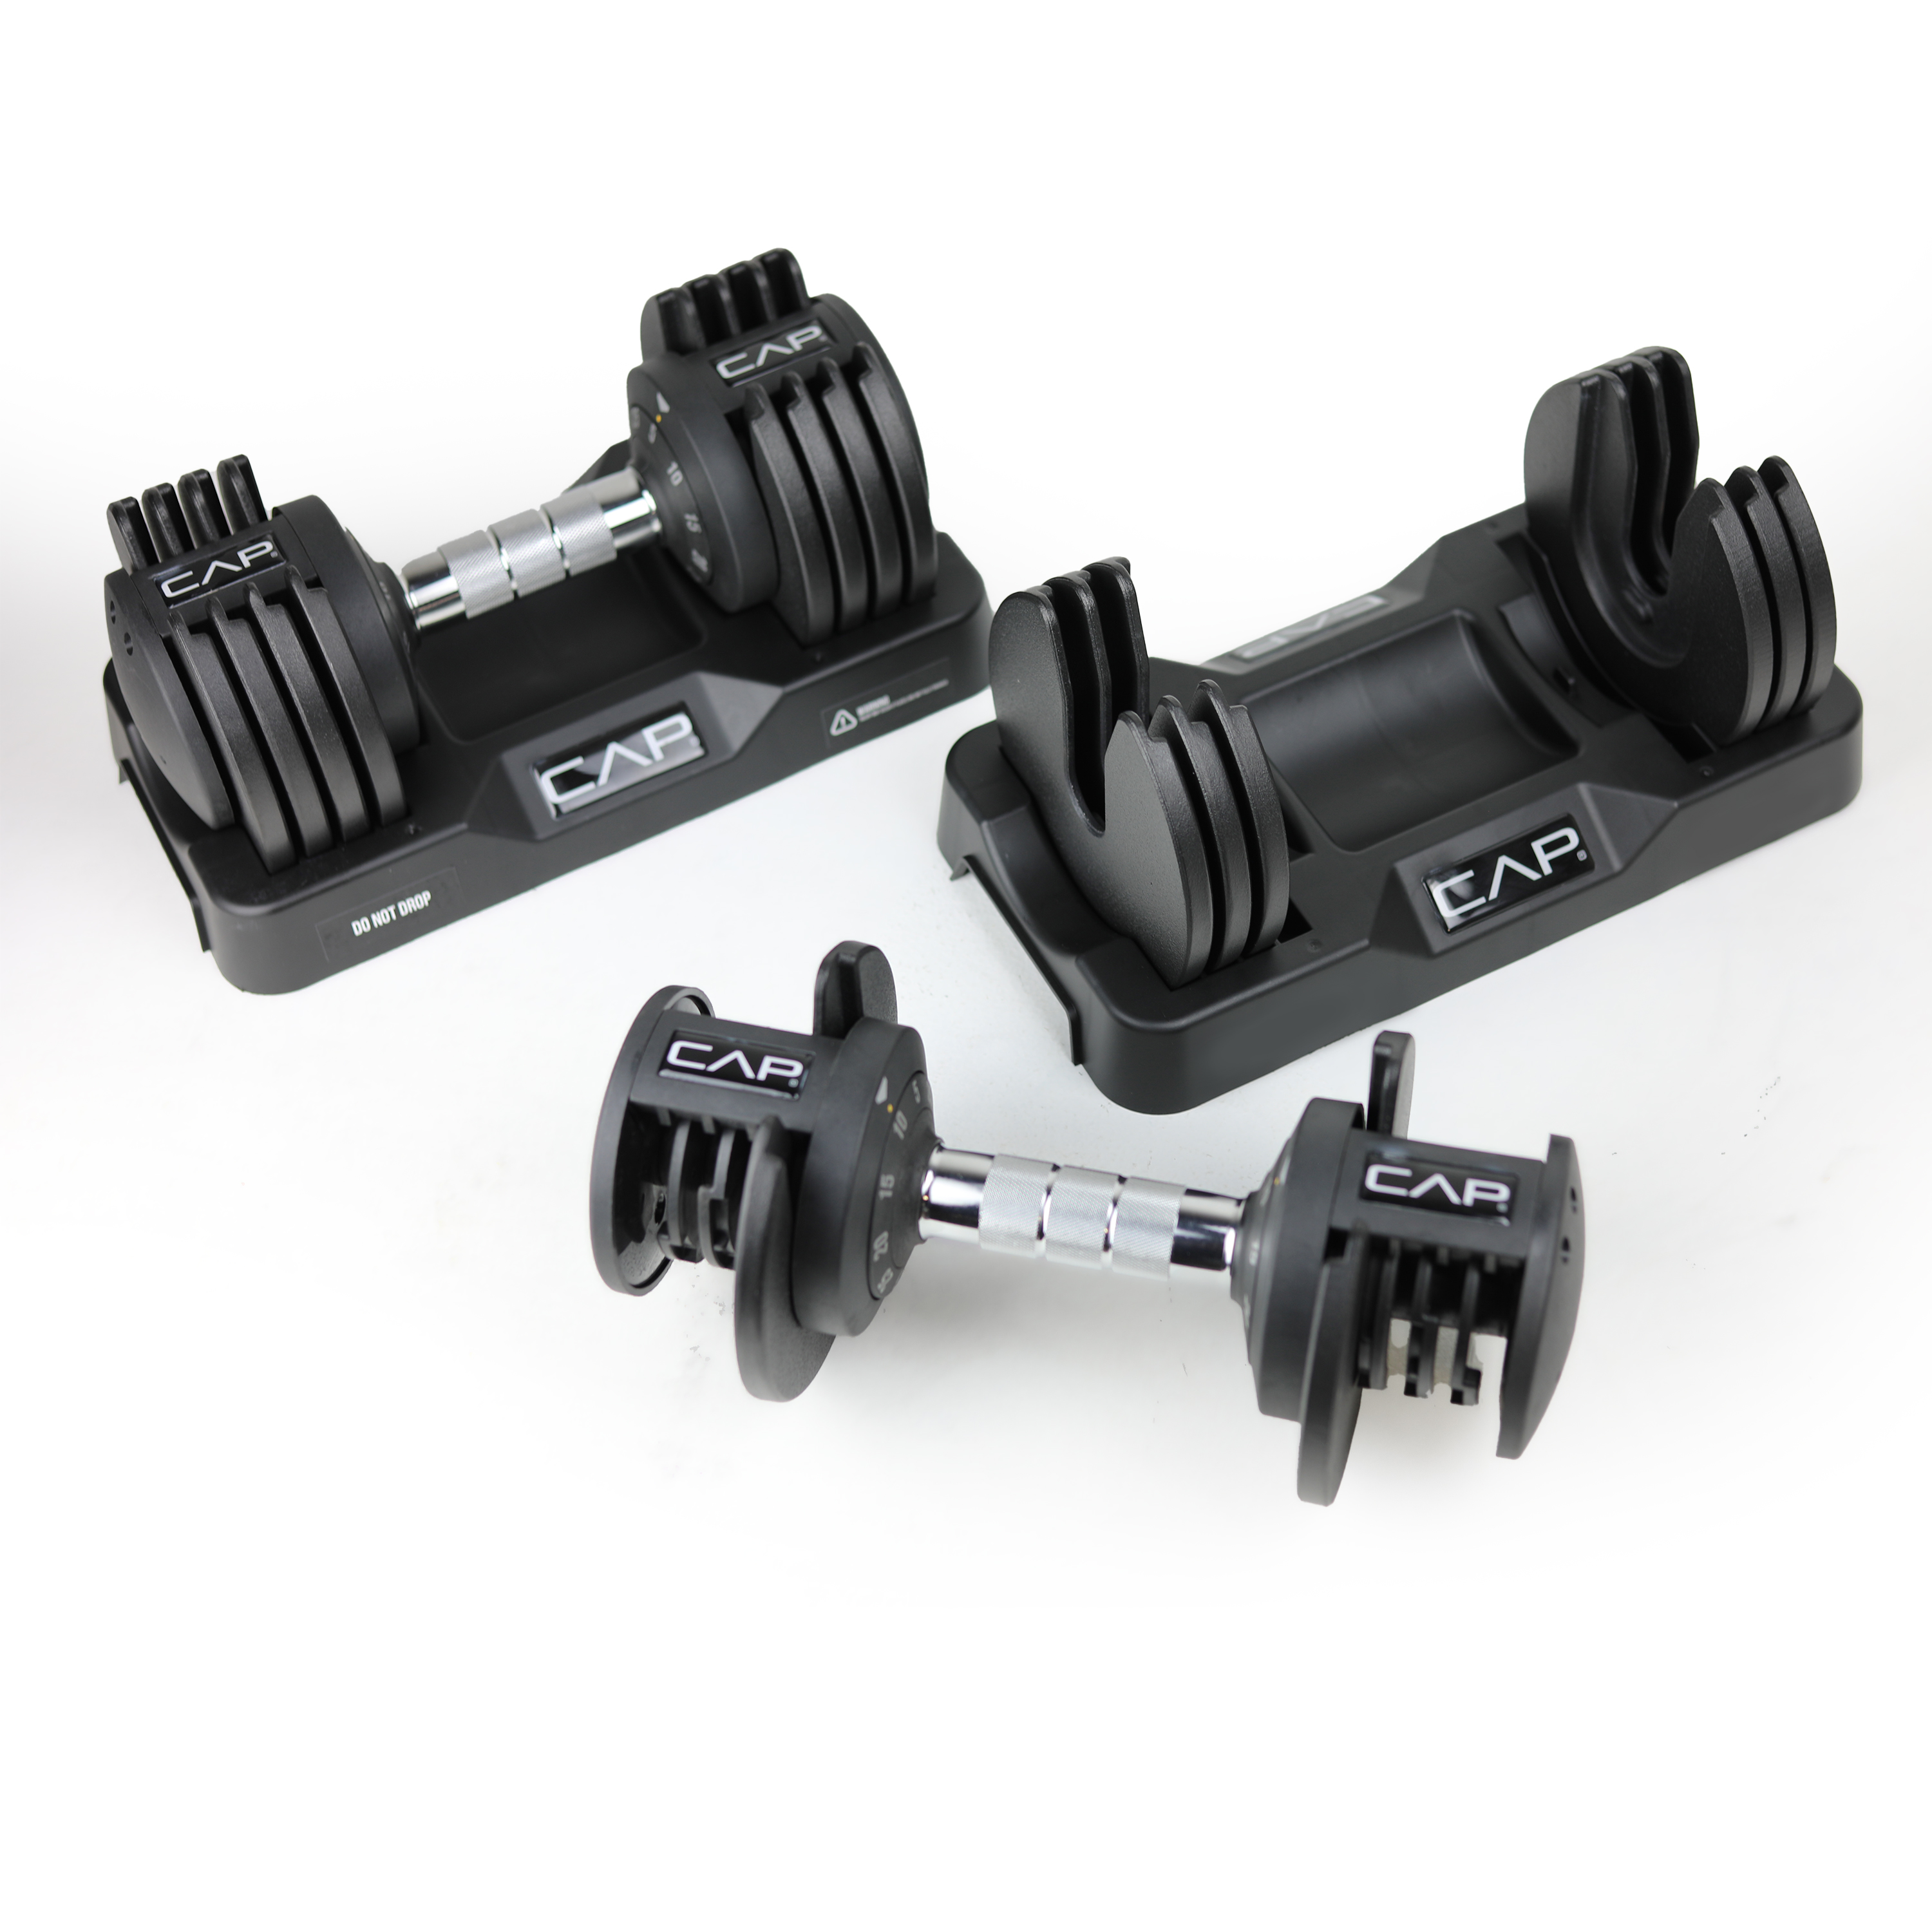 CAP Barbell 25 lb Adjustable Dumbbell Set, Quick Select Adjustability from 5-25 lb, Pair, Black - image 1 of 7